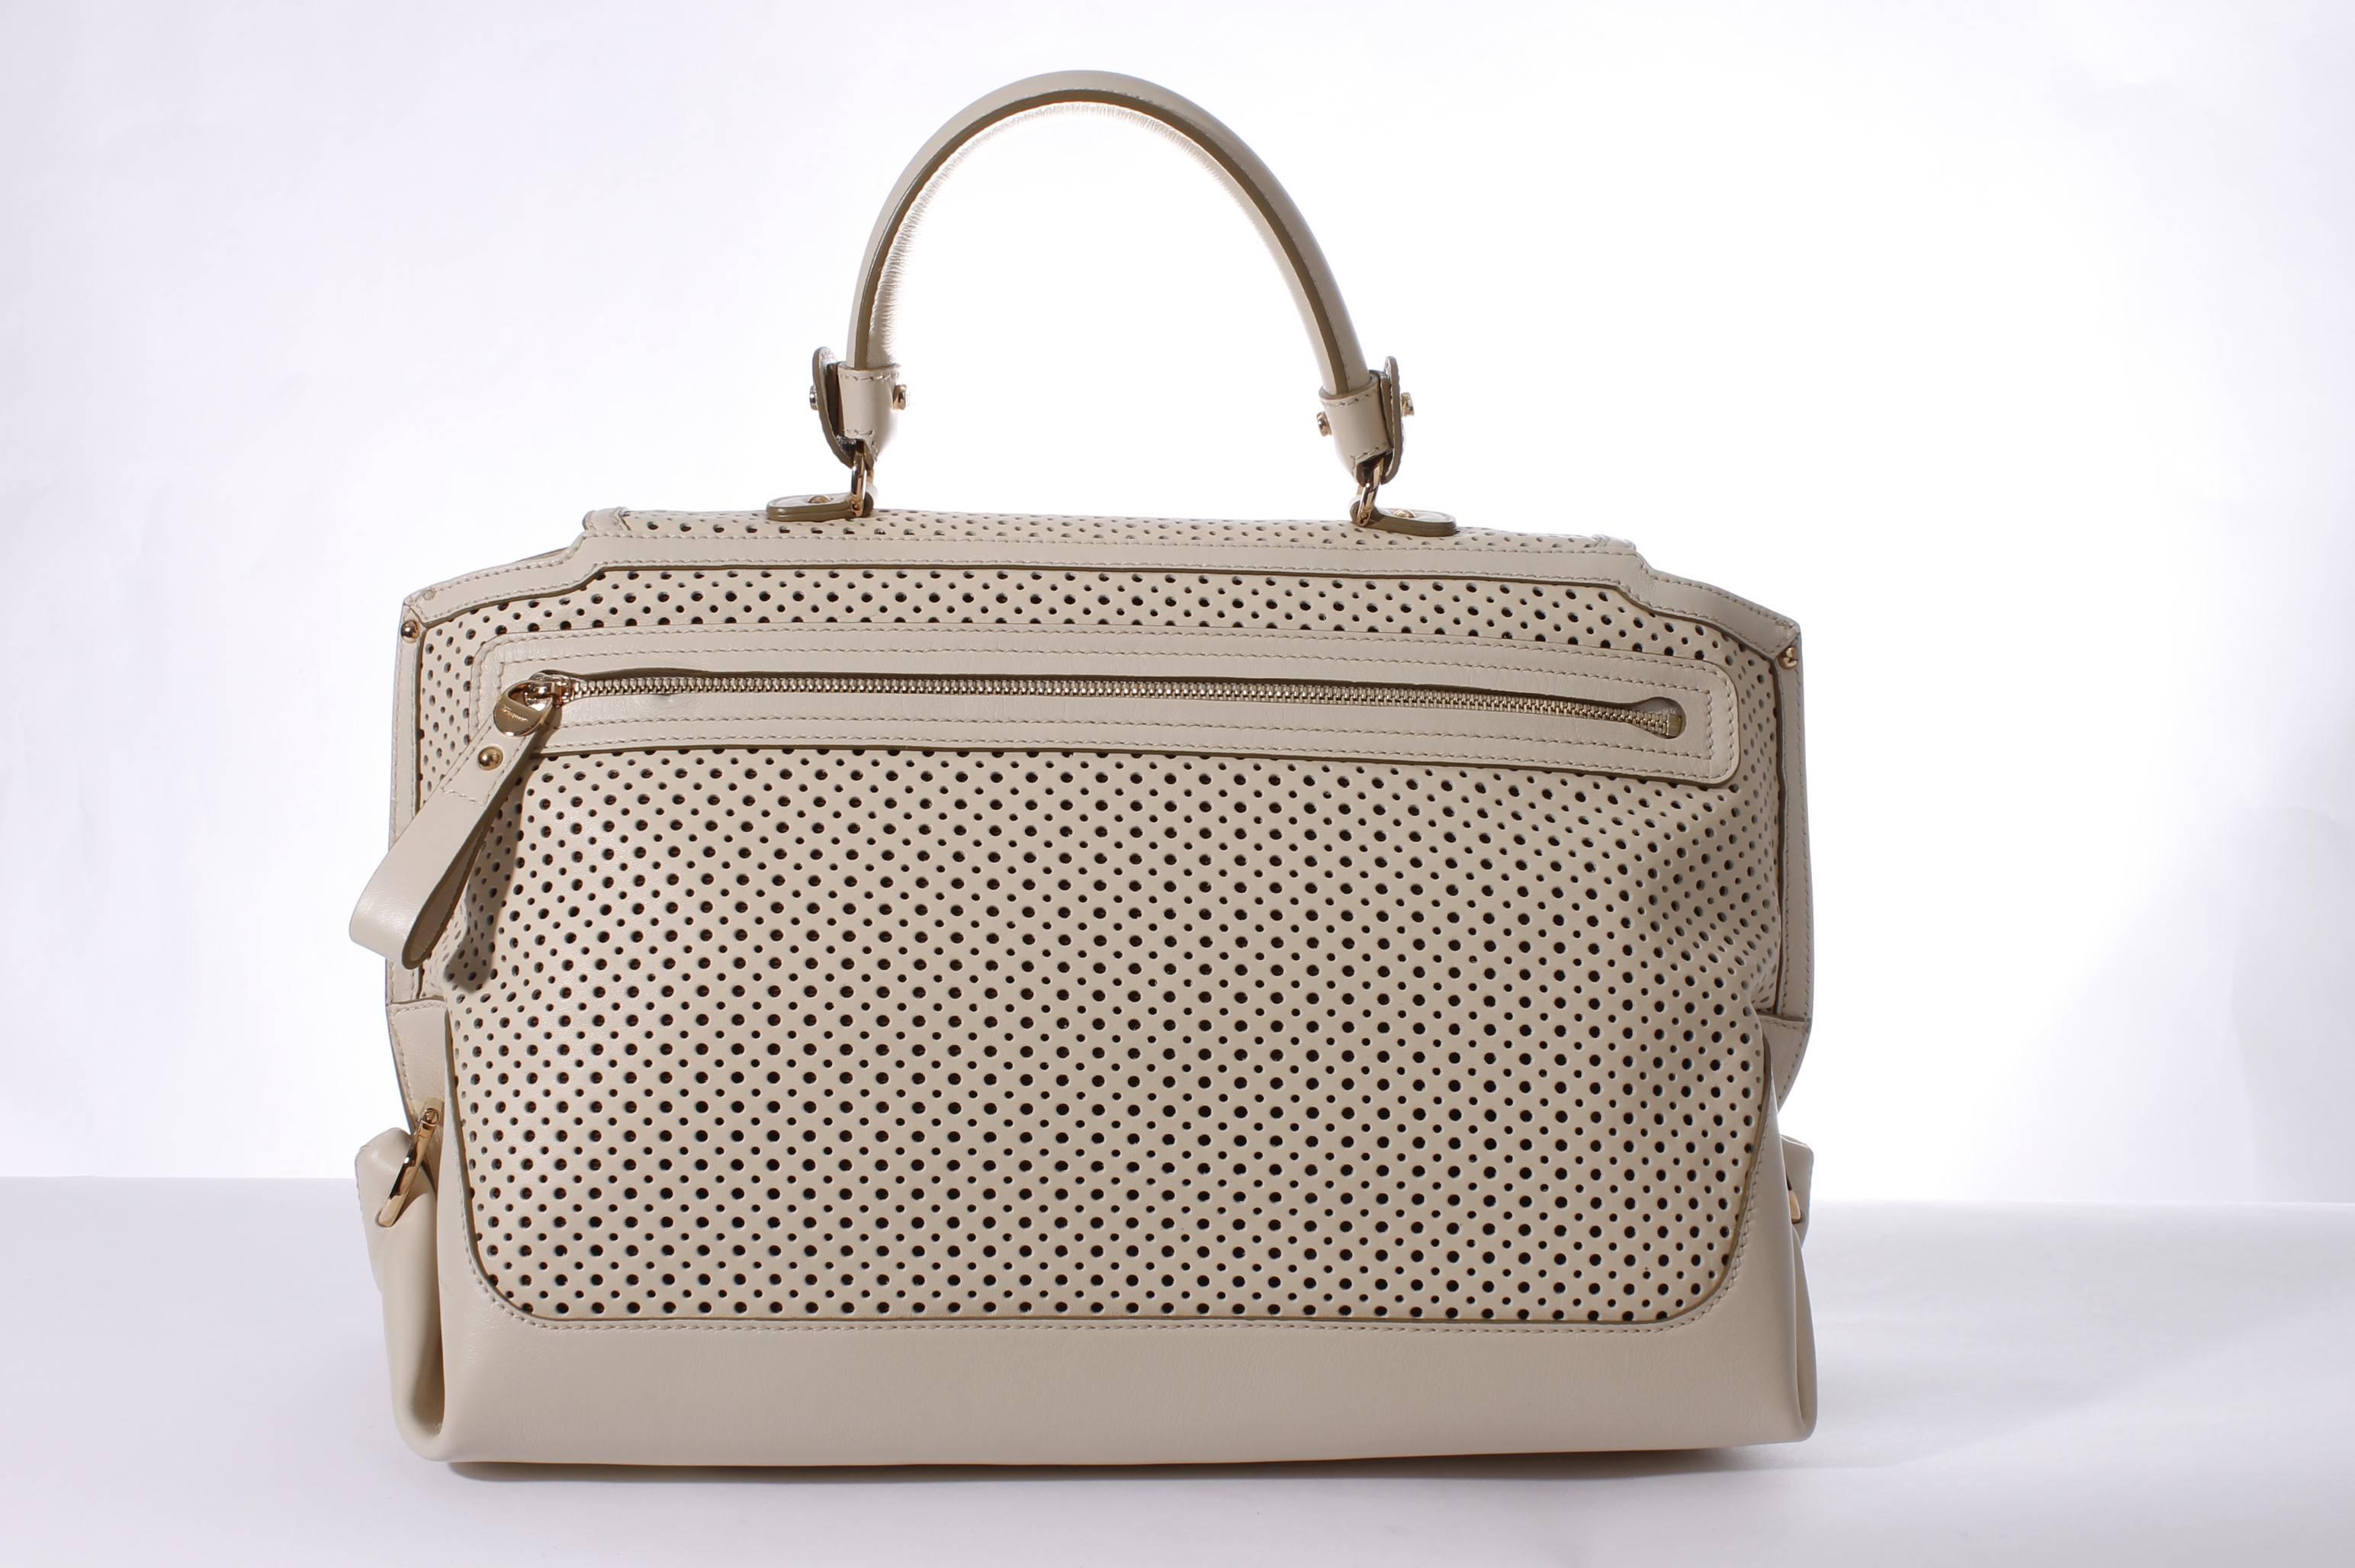 This Salvatore Ferragamo bag is made of pierced leather in off-white. It's the Sofia Large Tote Bag, very stylish!

Shiny golden hardware, a long zipper on the back. Another zipper underneath the flap, this bag closes very well. Lined with dark